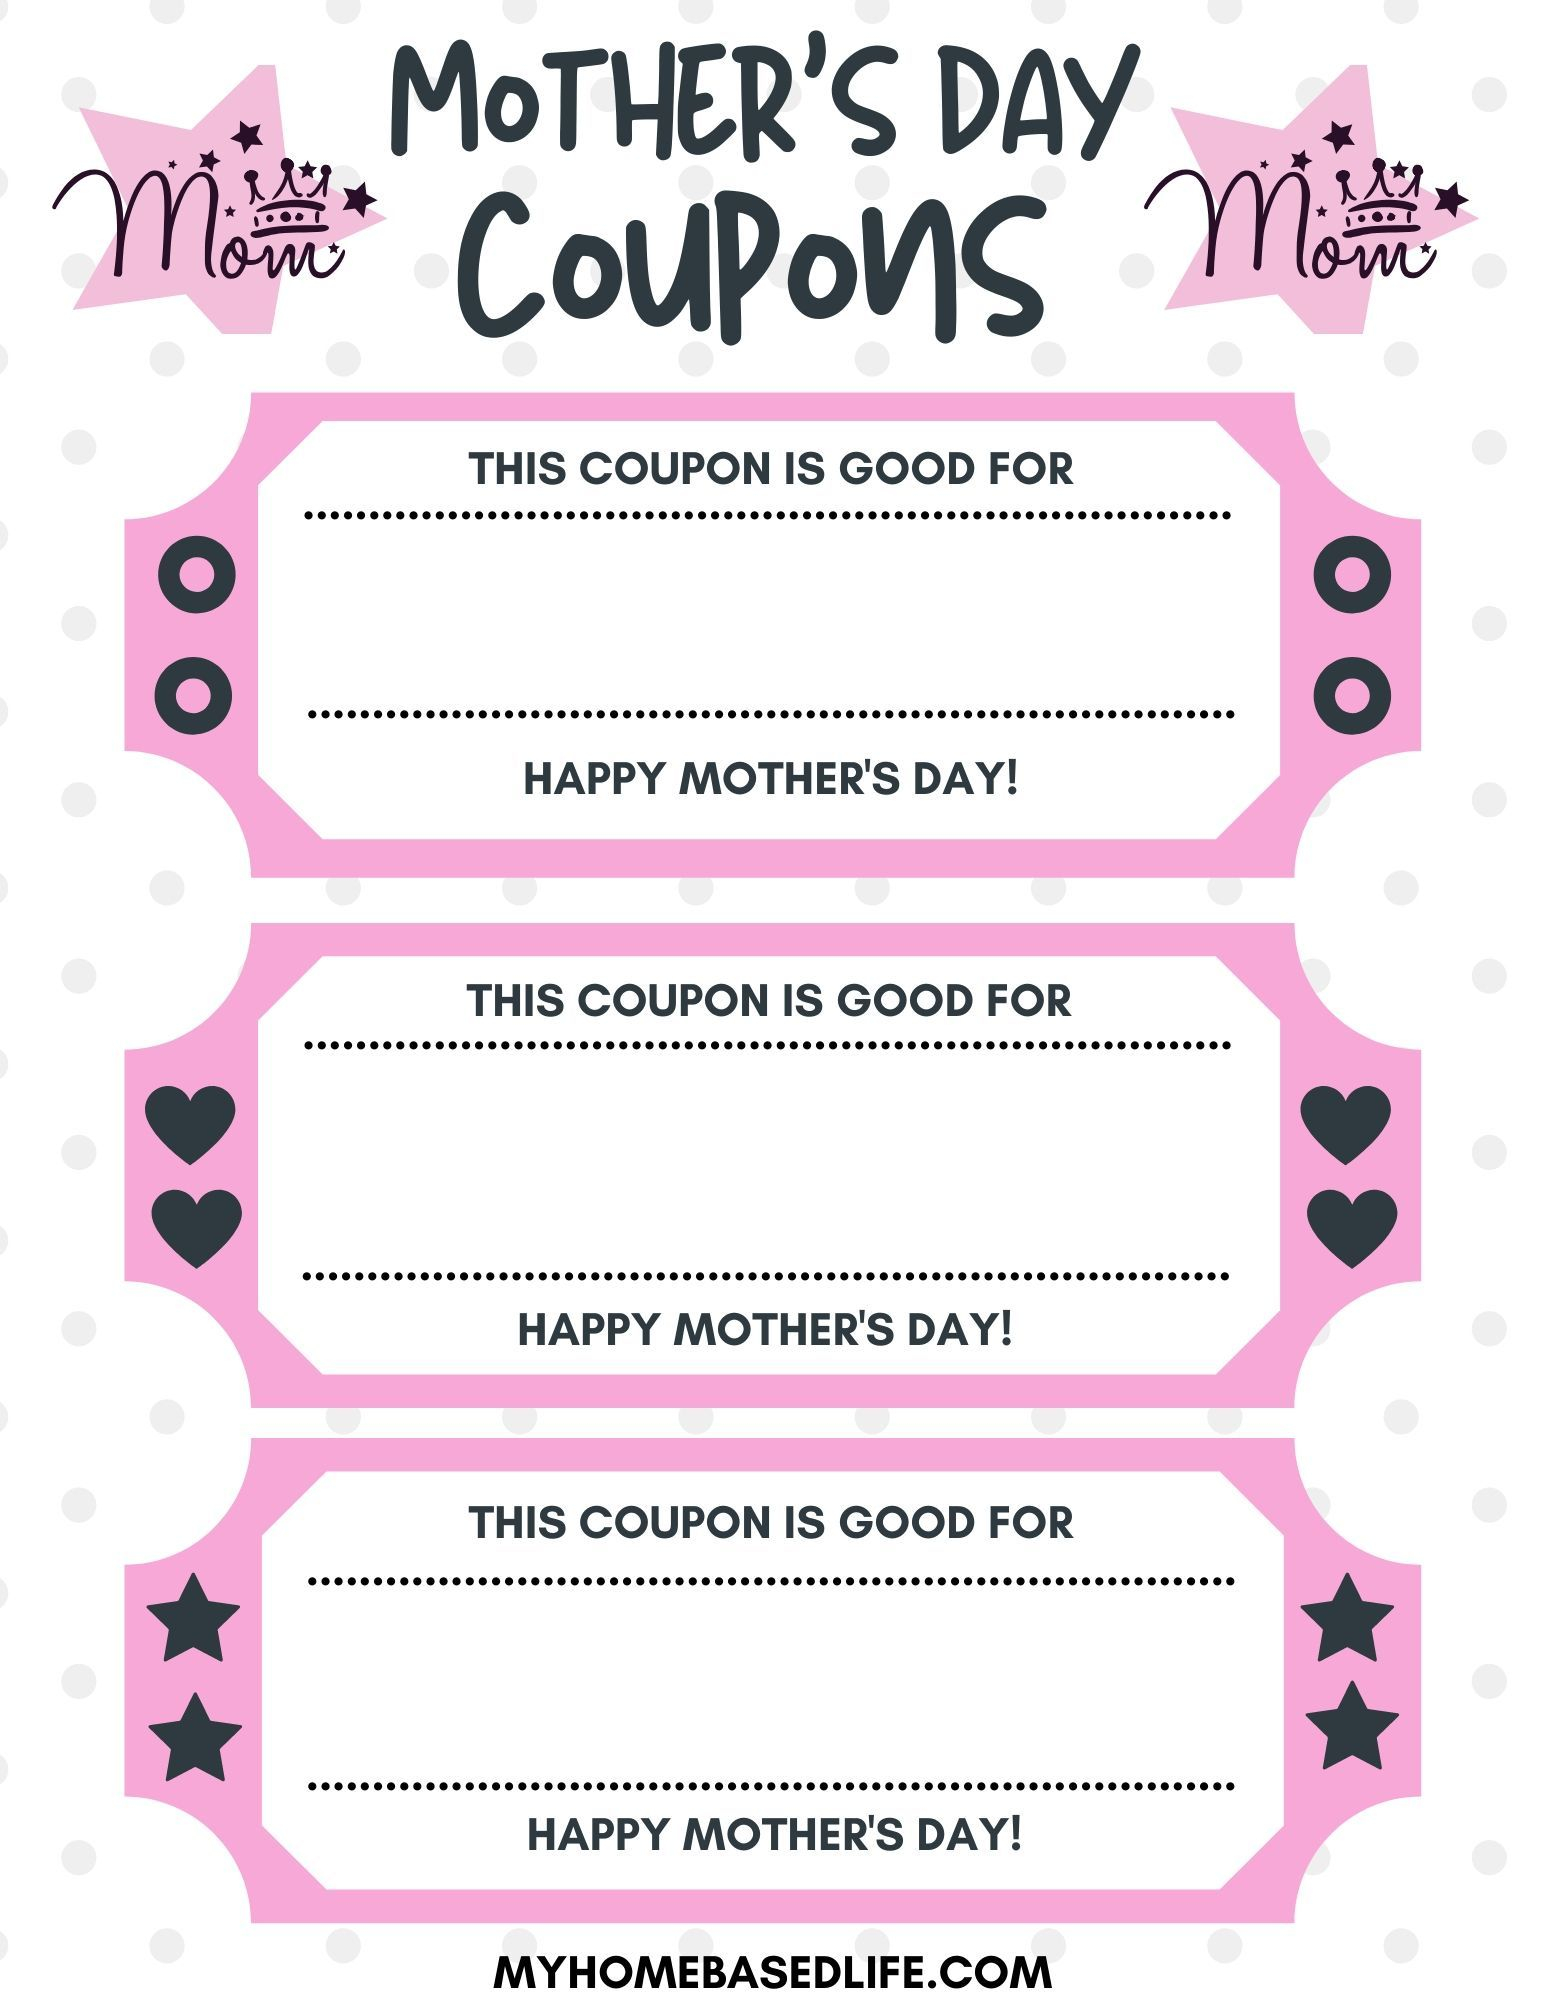 Free Printable Mother s Day Coupons My Home Based Life In 2020